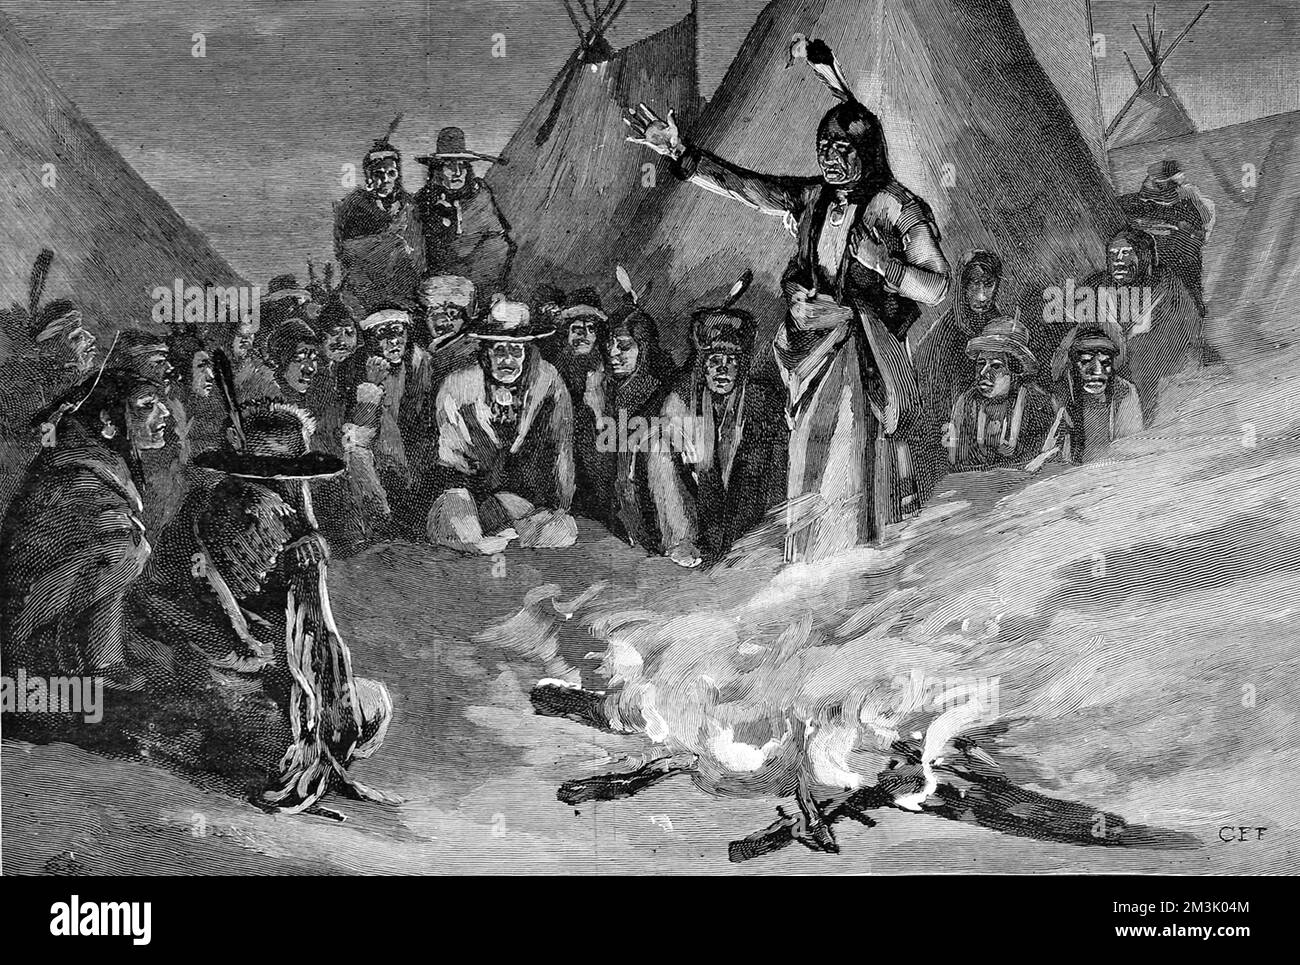 Sitting was an inspirational Sioux Chief, who together with Crazy Horse, defeated Custer and tried to prevent the American Indians being forced into reservations. He escaped to Canada in 1879, but returned to American in 1881 under an amnesty. He was shot just after this image was published during an Indian uprising     Date: 1890 Stock Photo